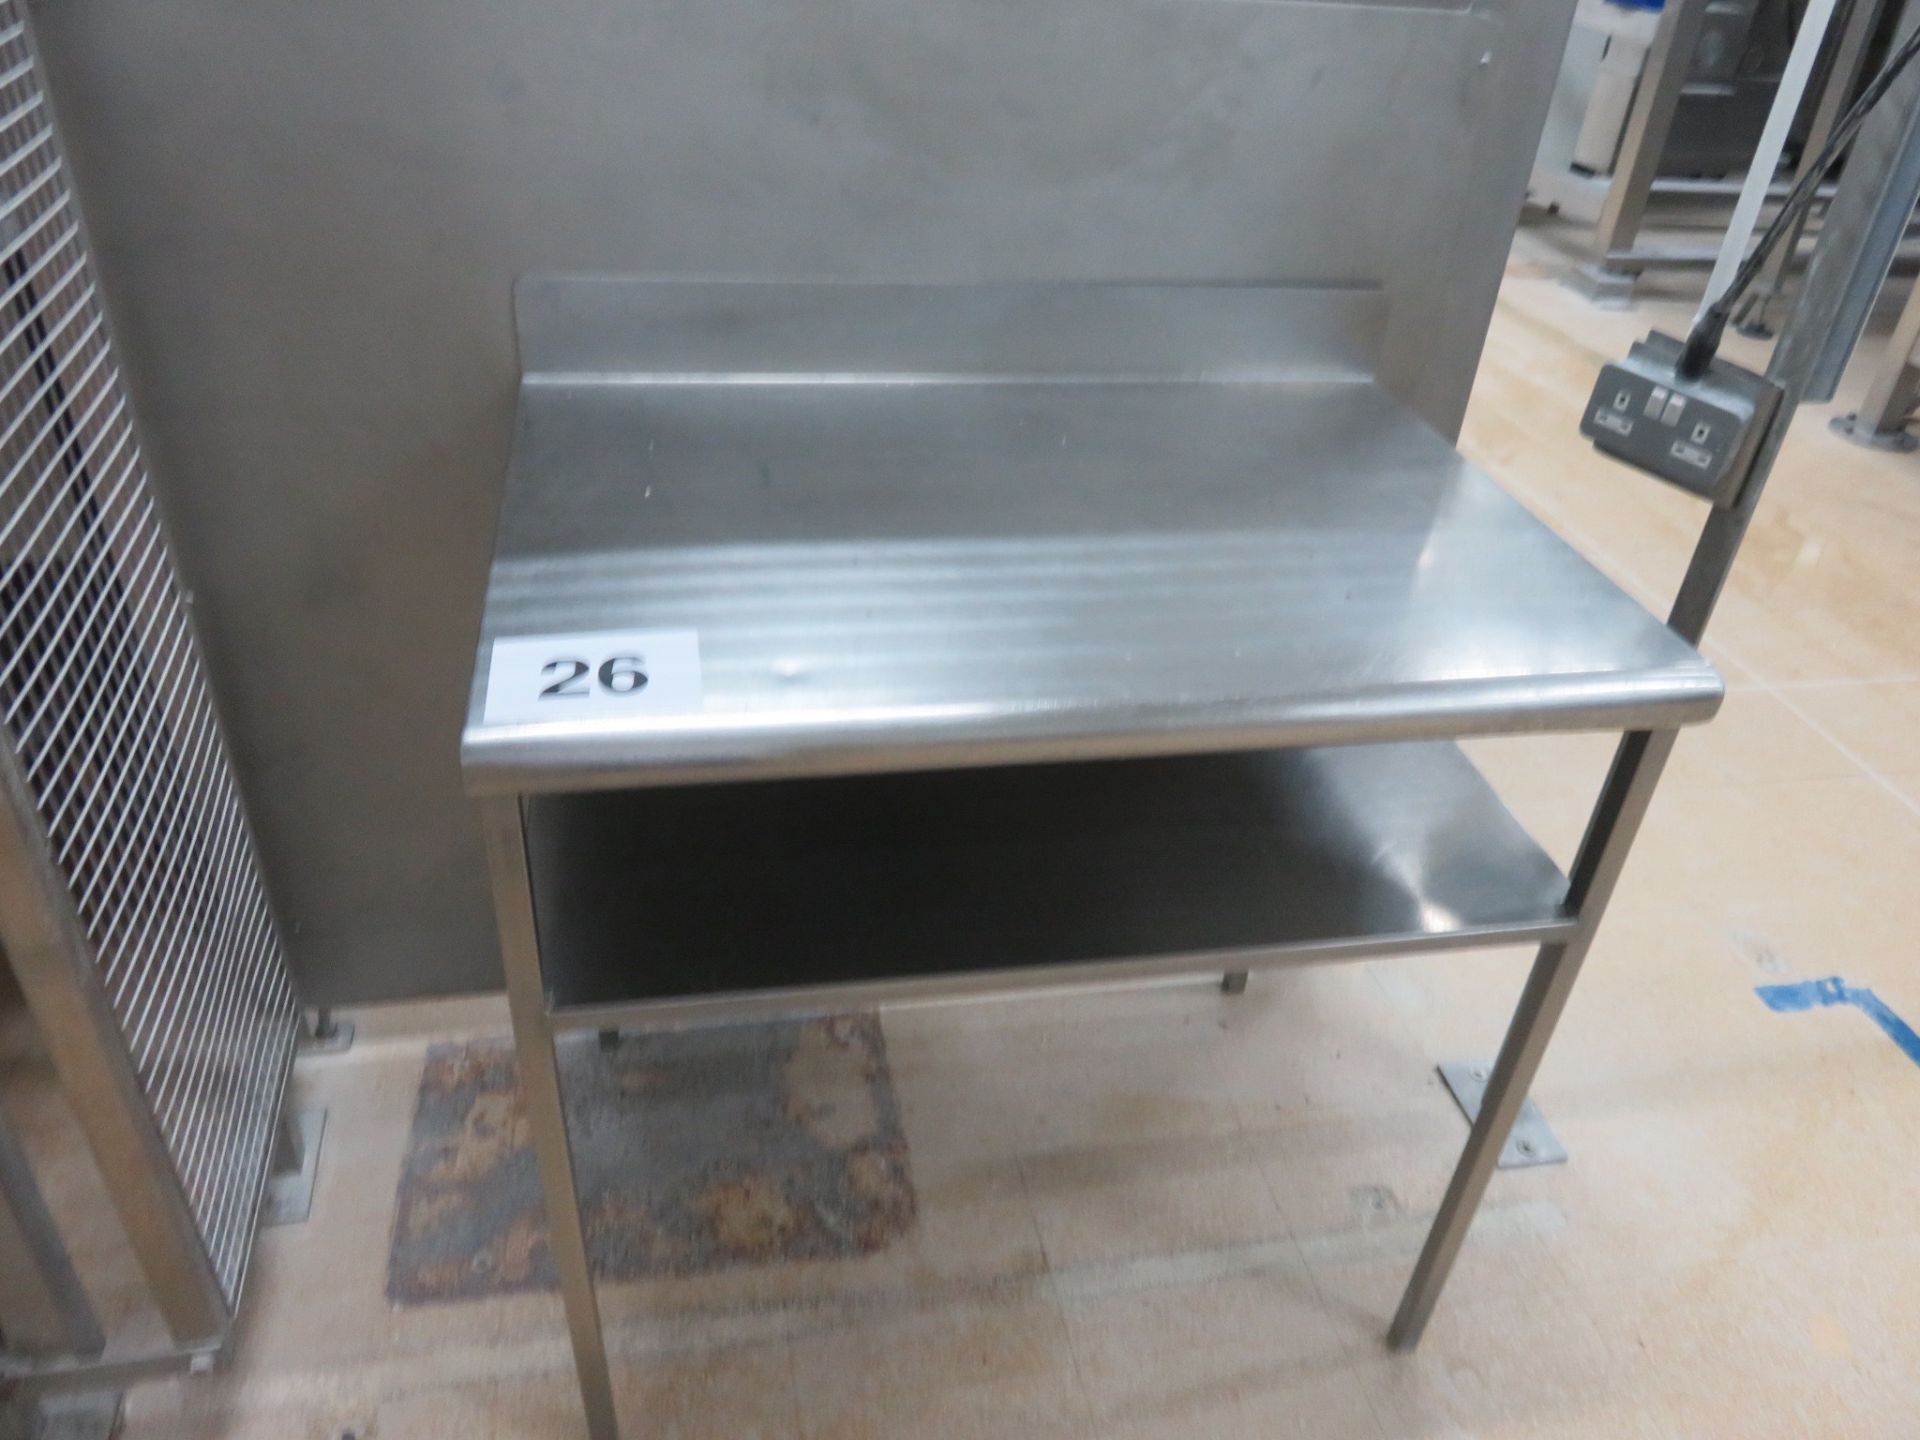 S/s Shelf. Approx 900mm x 650mm x 900mm high. Lift Out £10